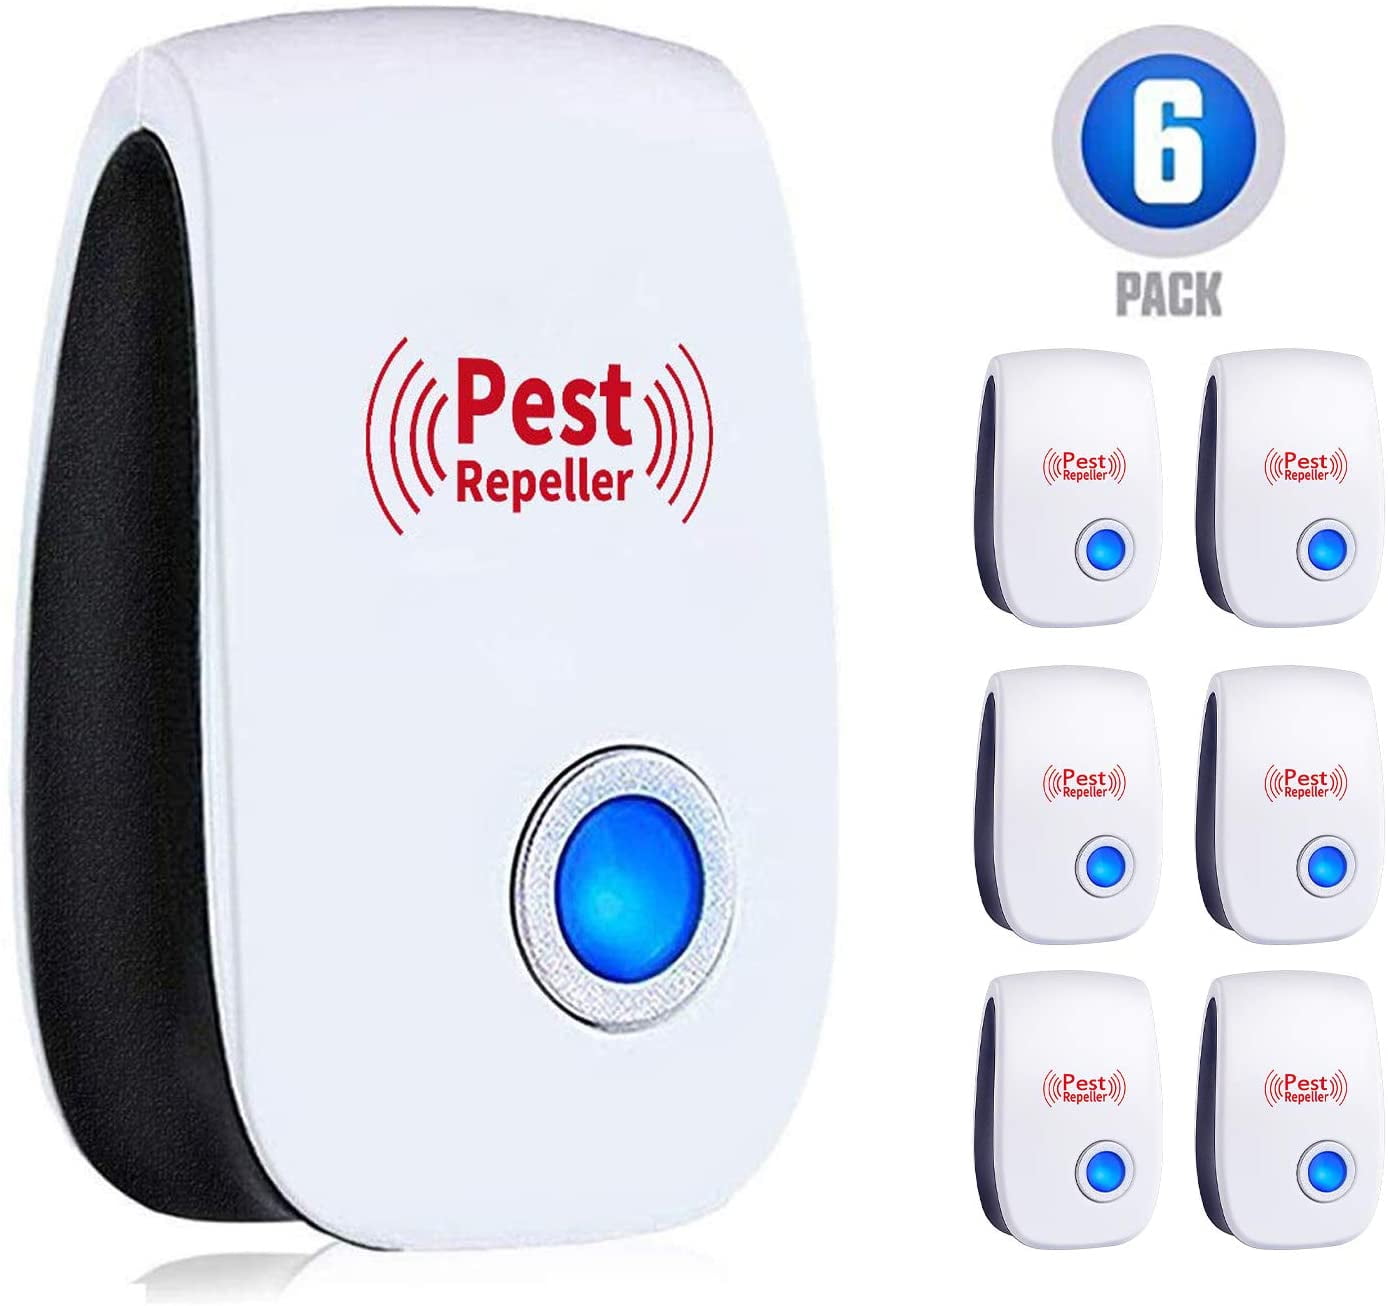 Repeller EU plug in Ultrasonic Electronic Pest Control Rat Mouse Mice Spider wht 